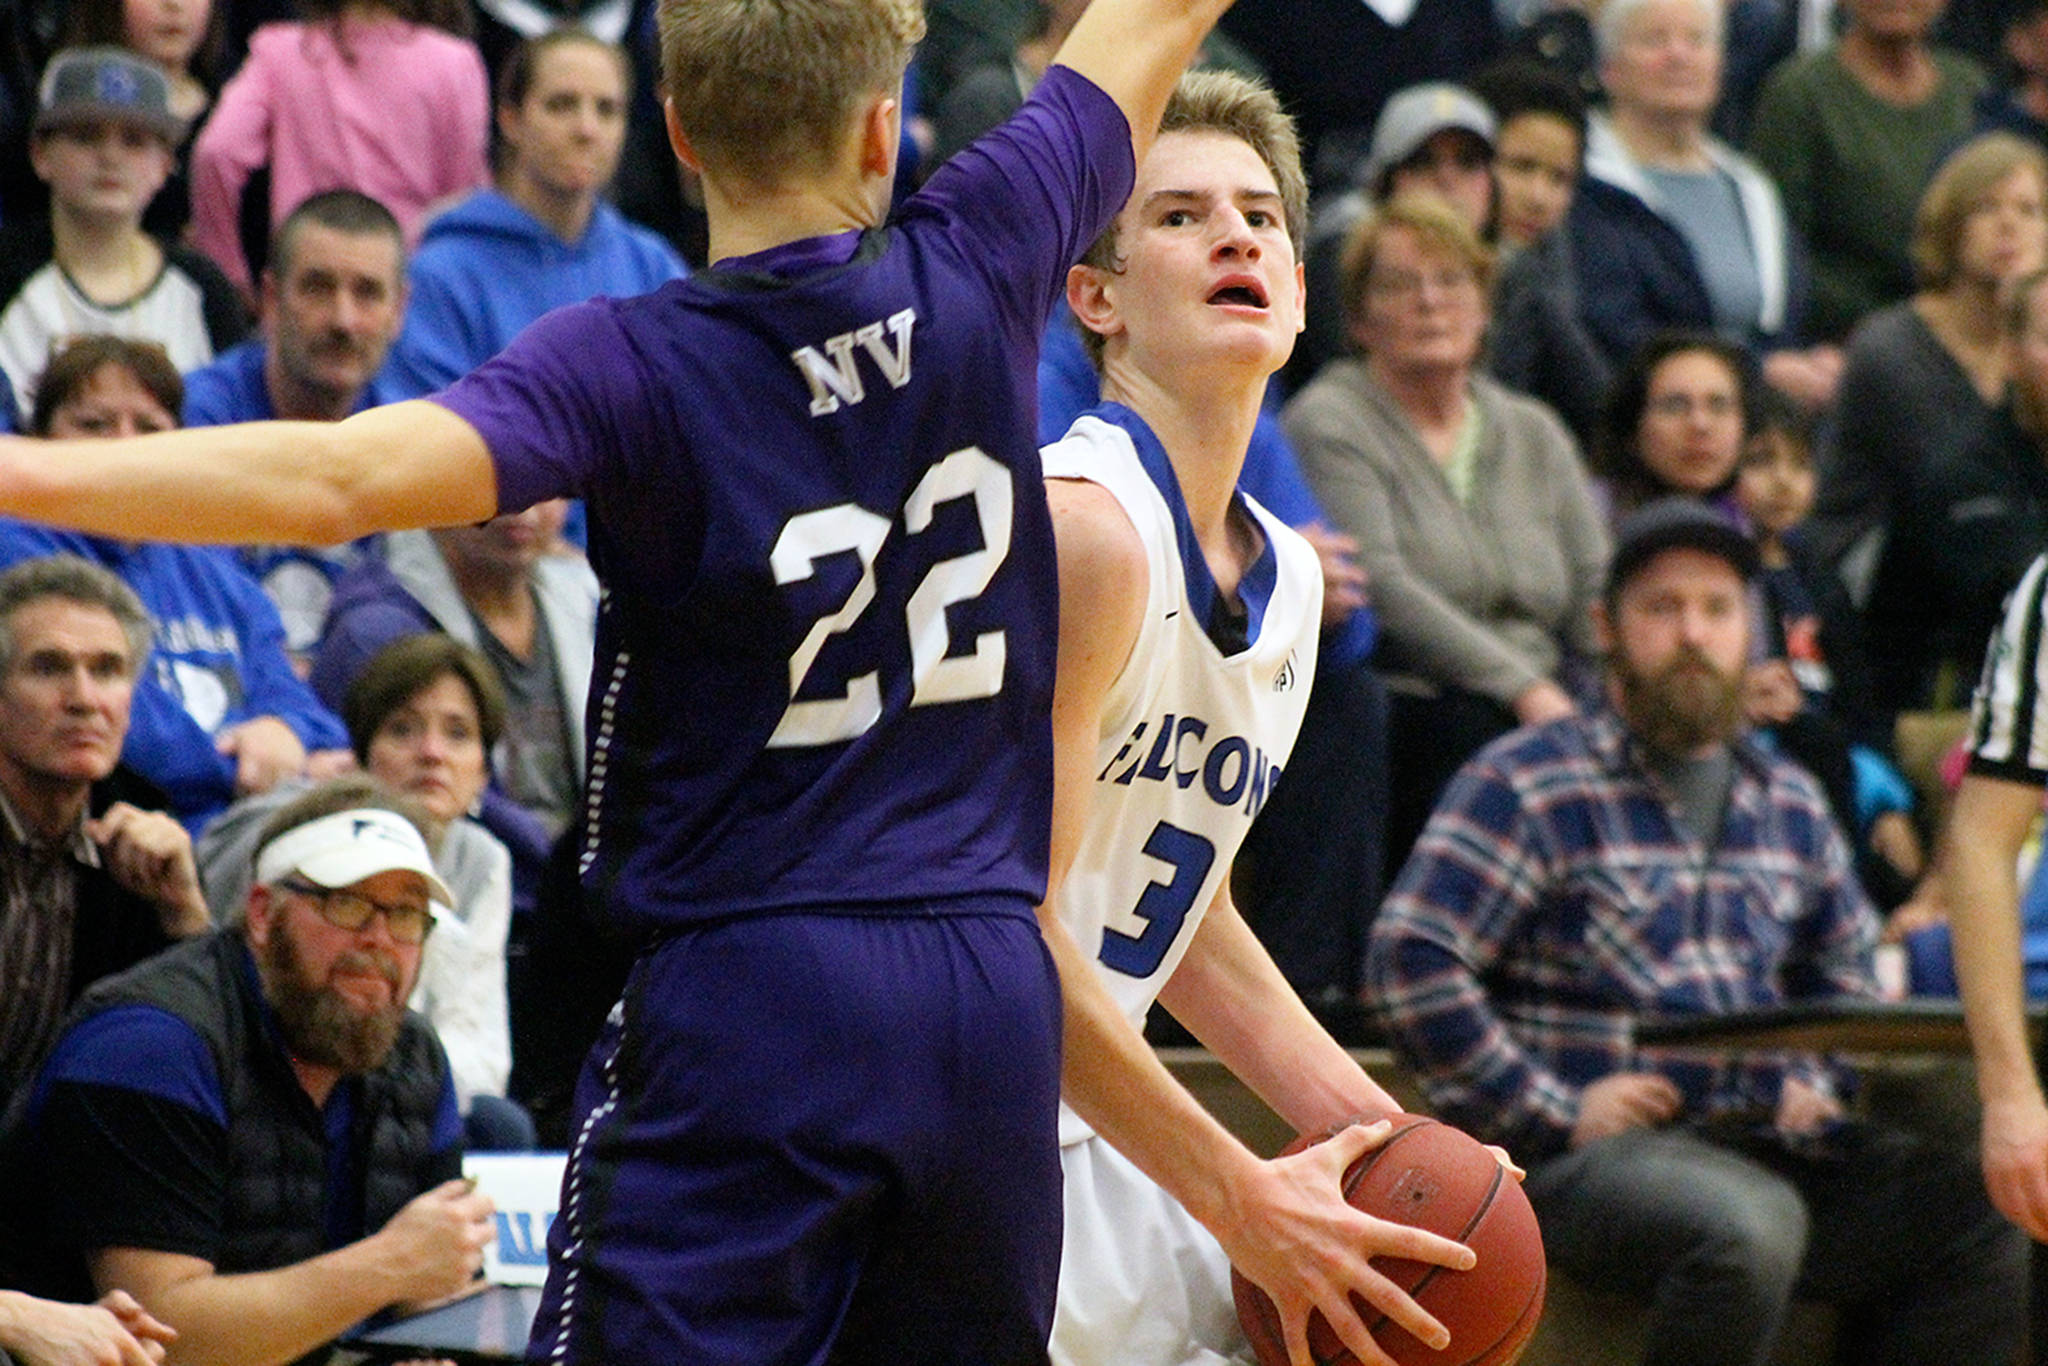 South Whidbey drops district semifinal to Nooksack Valley